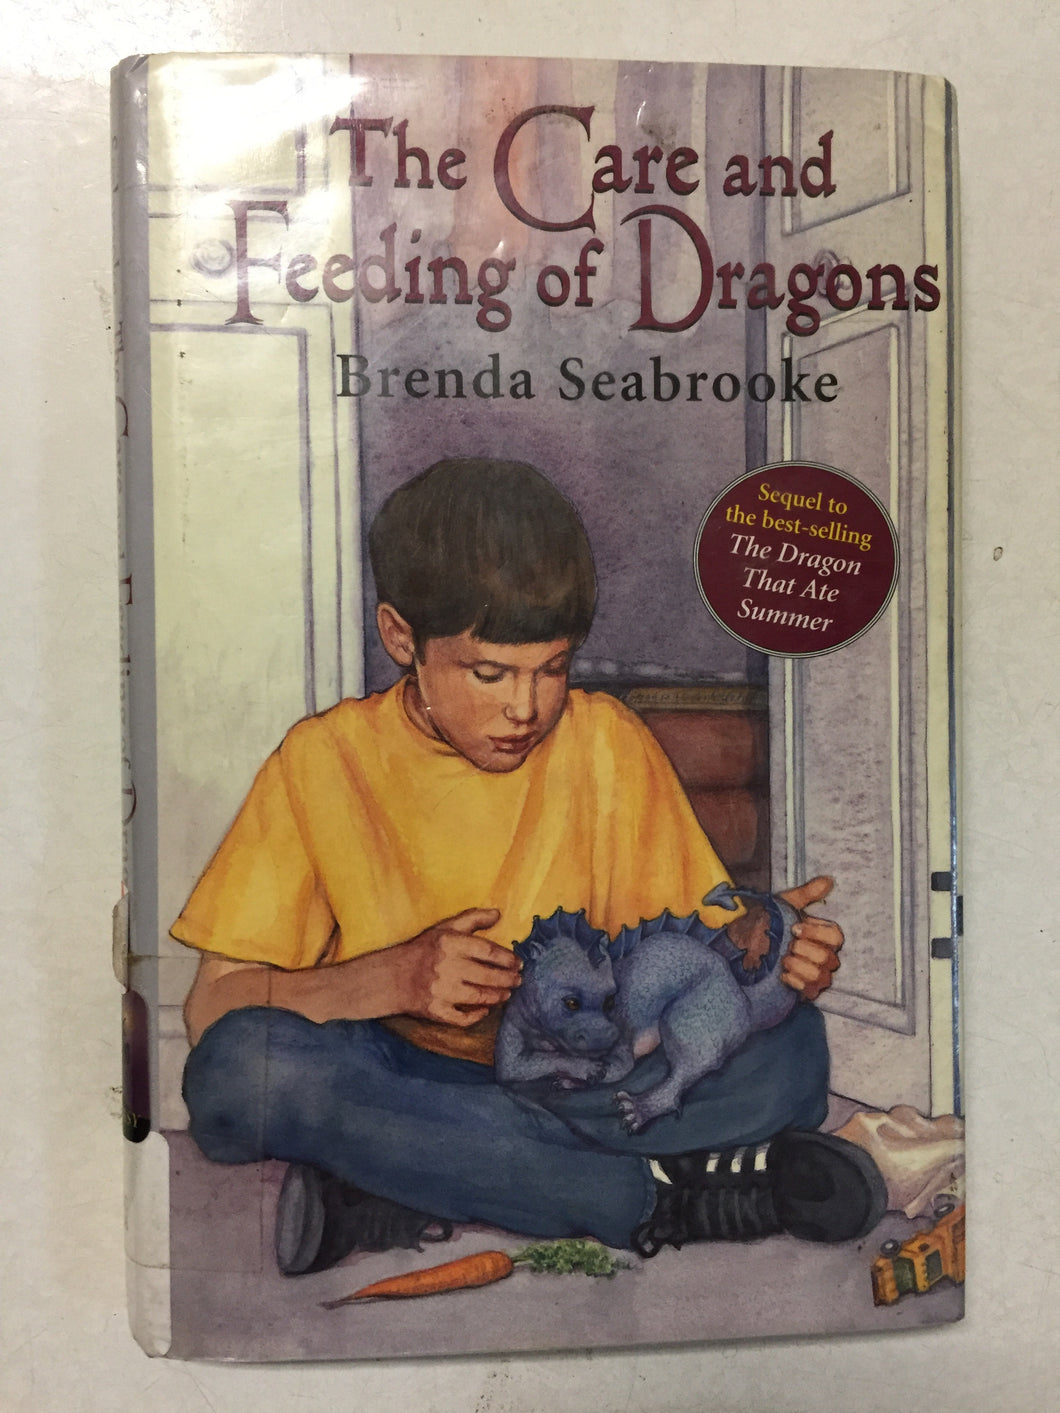 The Care and Feeding of Dragons - Slickcatbooks